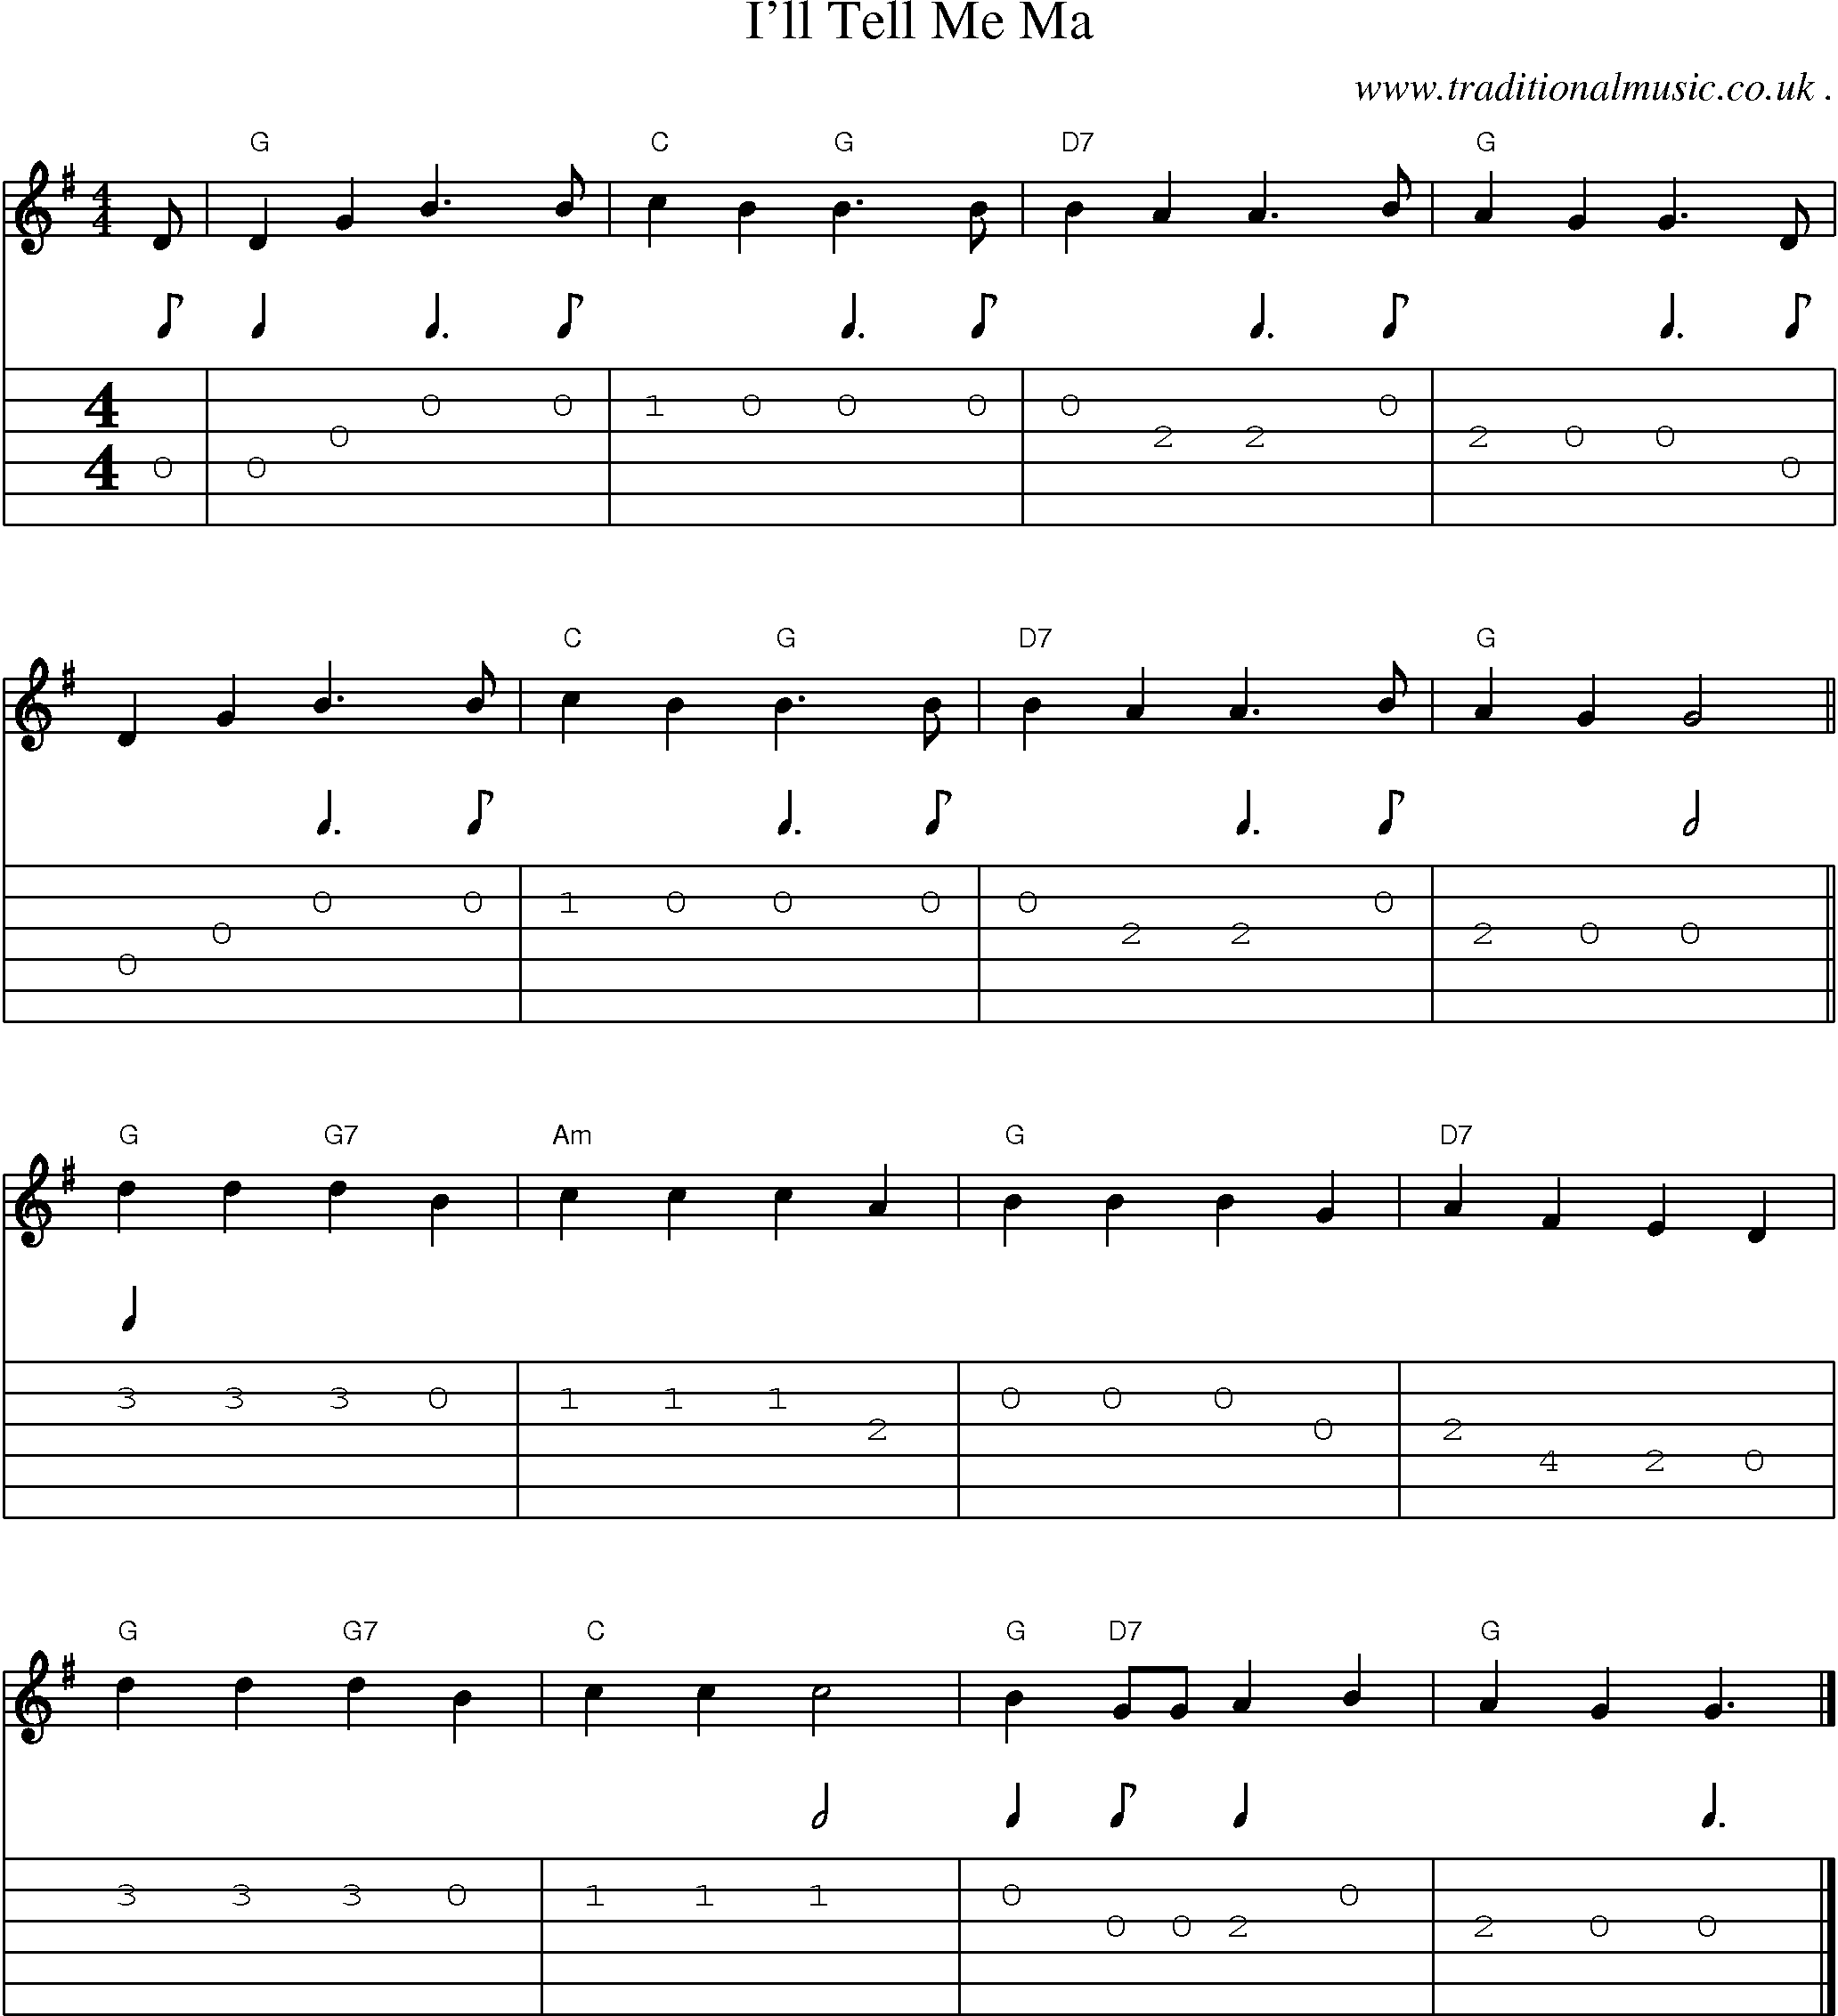 Music Score and Guitar Tabs for Ill Tell Me Ma